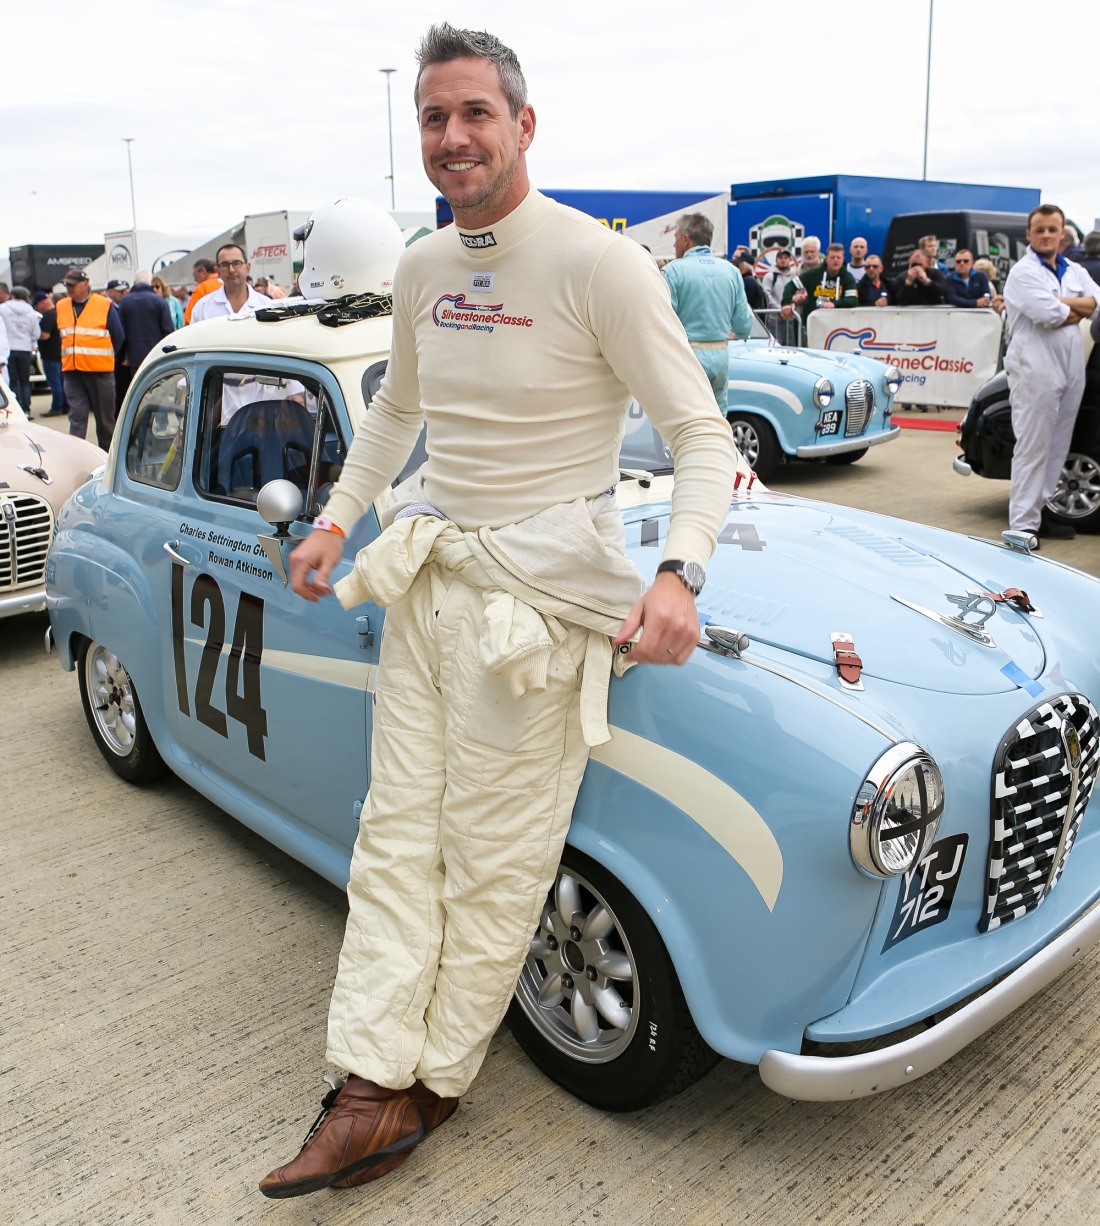 Ant Anstead at the Silverstone Classic 2017